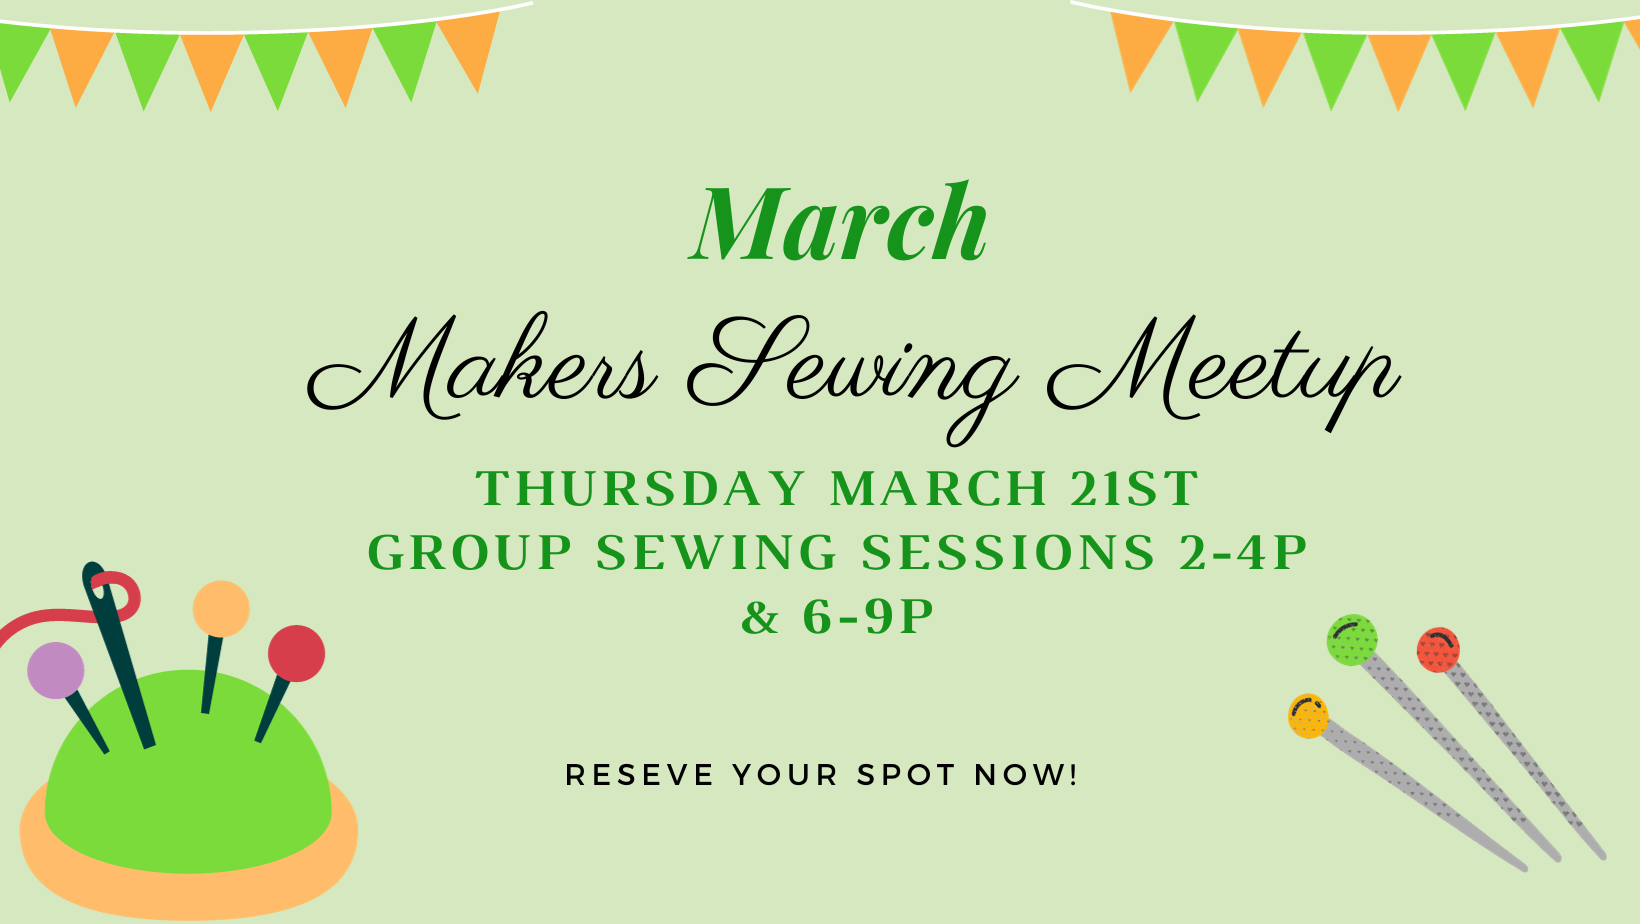 details about the March Makers Sewing Meetup